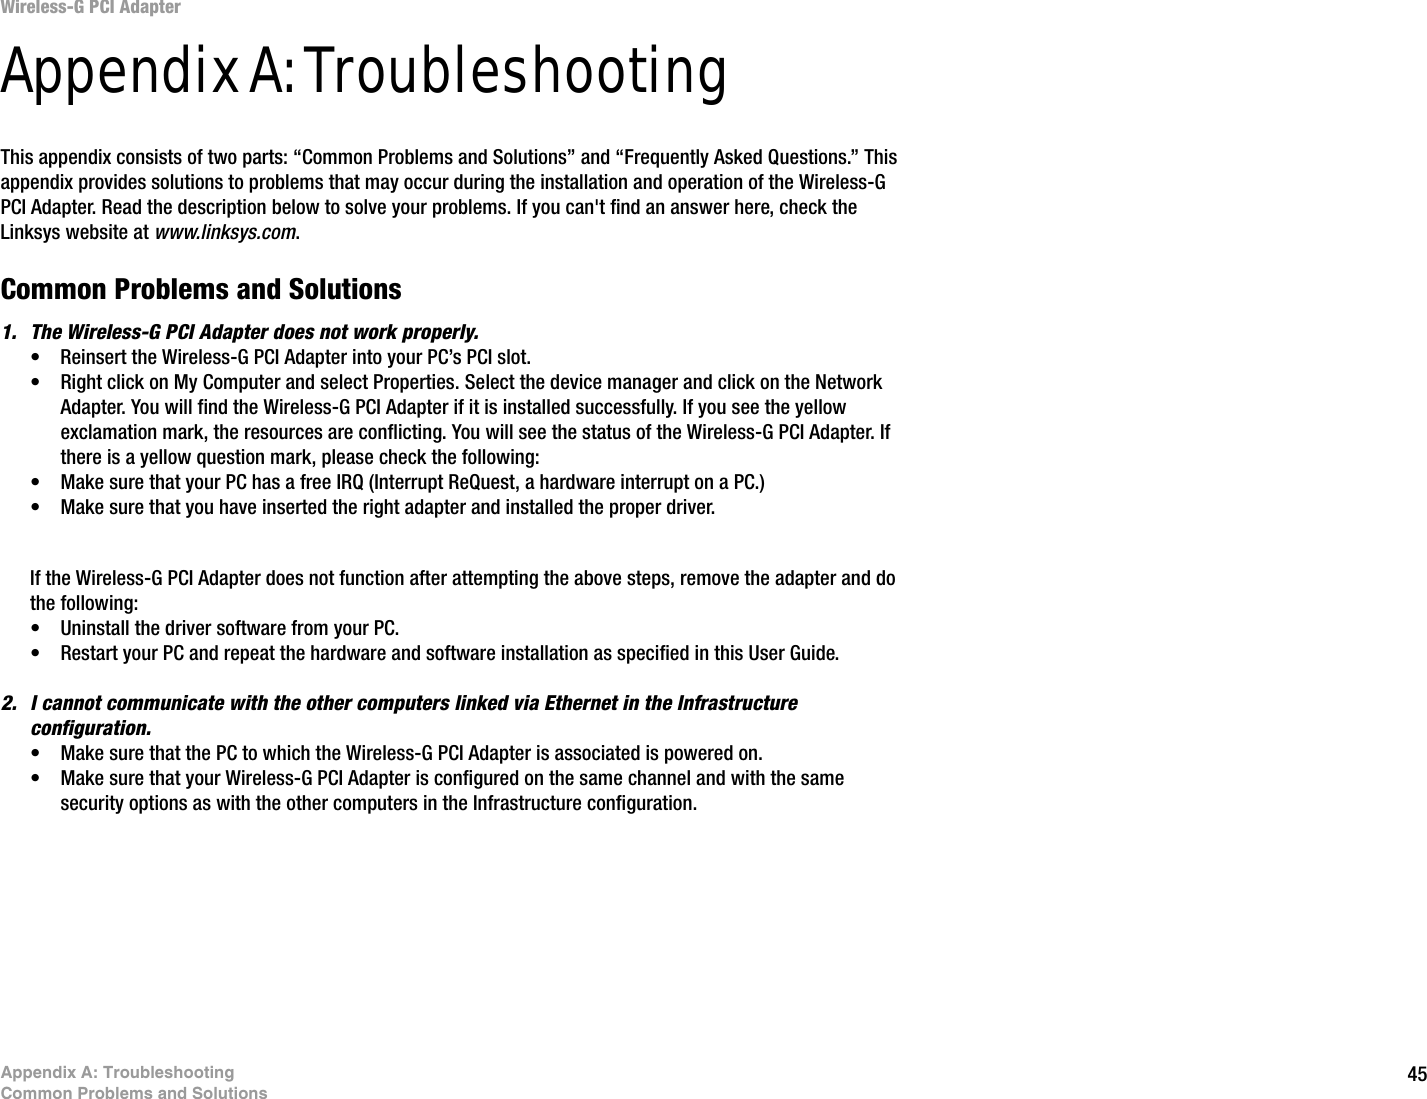 45Appendix A: TroubleshootingCommon Problems and SolutionsWireless-G PCI AdapterAppendix A: TroubleshootingThis appendix consists of two parts: “Common Problems and Solutions” and “Frequently Asked Questions.” This appendix provides solutions to problems that may occur during the installation and operation of the Wireless-G PCI Adapter. Read the description below to solve your problems. If you can&apos;t find an answer here, check the Linksys website at www.linksys.com.Common Problems and Solutions1. The Wireless-G PCI Adapter does not work properly.• Reinsert the Wireless-G PCI Adapter into your PC’s PCI slot.• Right click on My Computer and select Properties. Select the device manager and click on the Network Adapter. You will find the Wireless-G PCI Adapter if it is installed successfully. If you see the yellow exclamation mark, the resources are conflicting. You will see the status of the Wireless-G PCI Adapter. If there is a yellow question mark, please check the following:• Make sure that your PC has a free IRQ (Interrupt ReQuest, a hardware interrupt on a PC.) • Make sure that you have inserted the right adapter and installed the proper driver.If the Wireless-G PCI Adapter does not function after attempting the above steps, remove the adapter and do the following:• Uninstall the driver software from your PC.• Restart your PC and repeat the hardware and software installation as specified in this User Guide.2. I cannot communicate with the other computers linked via Ethernet in the Infrastructure configuration.• Make sure that the PC to which the Wireless-G PCI Adapter is associated is powered on.• Make sure that your Wireless-G PCI Adapter is configured on the same channel and with the same security options as with the other computers in the Infrastructure configuration. 